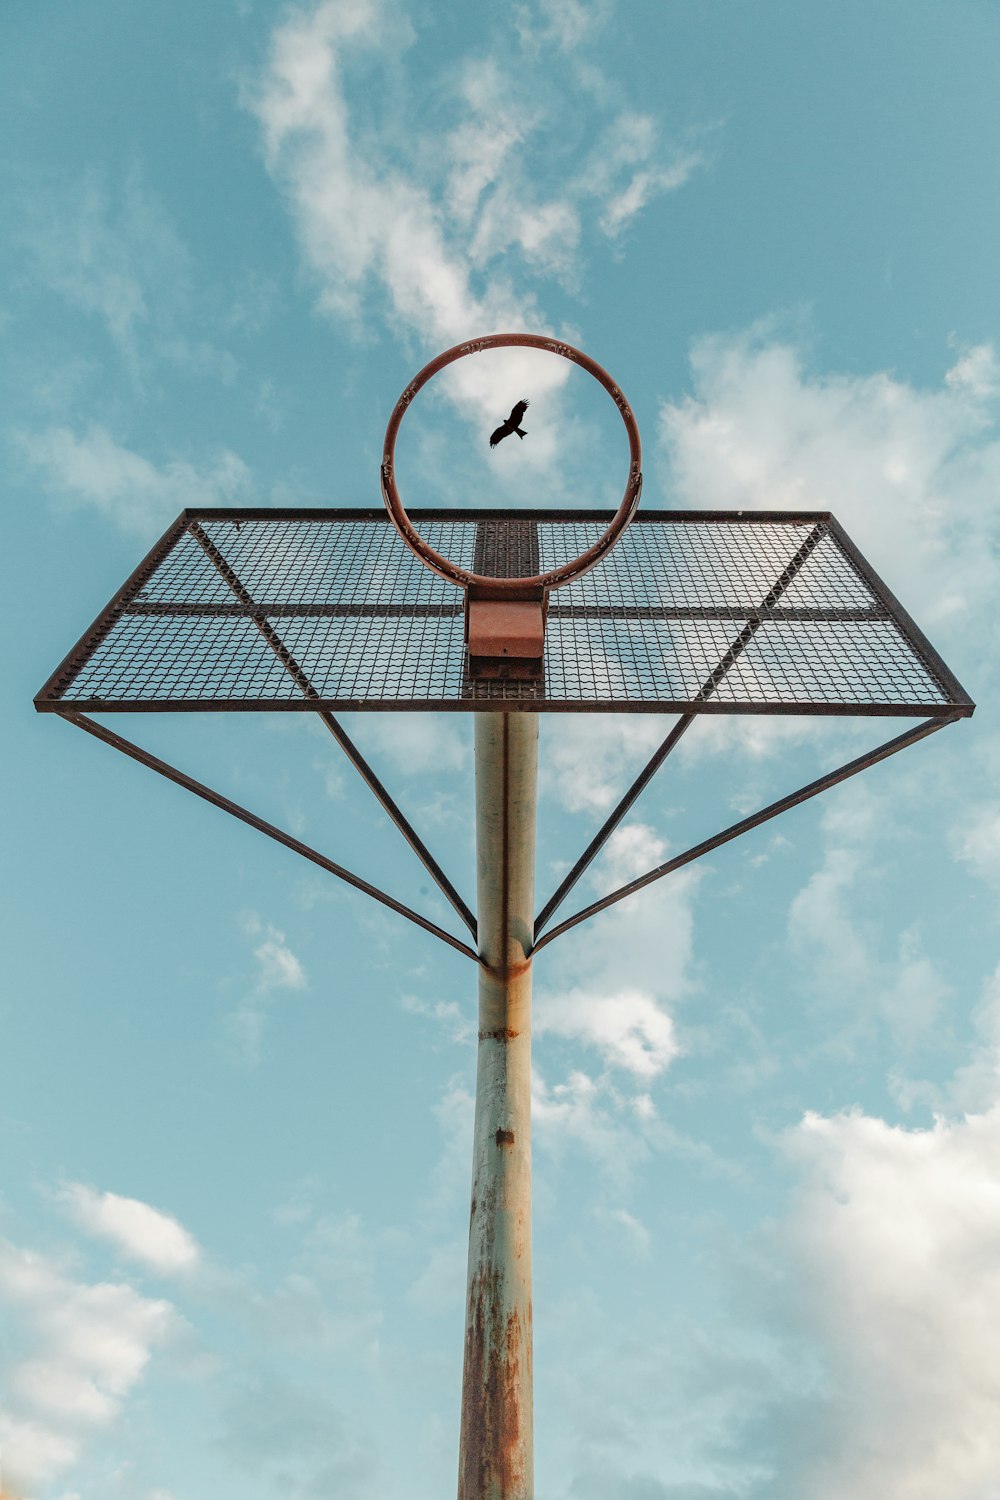 a bird sitting on top of a metal structure